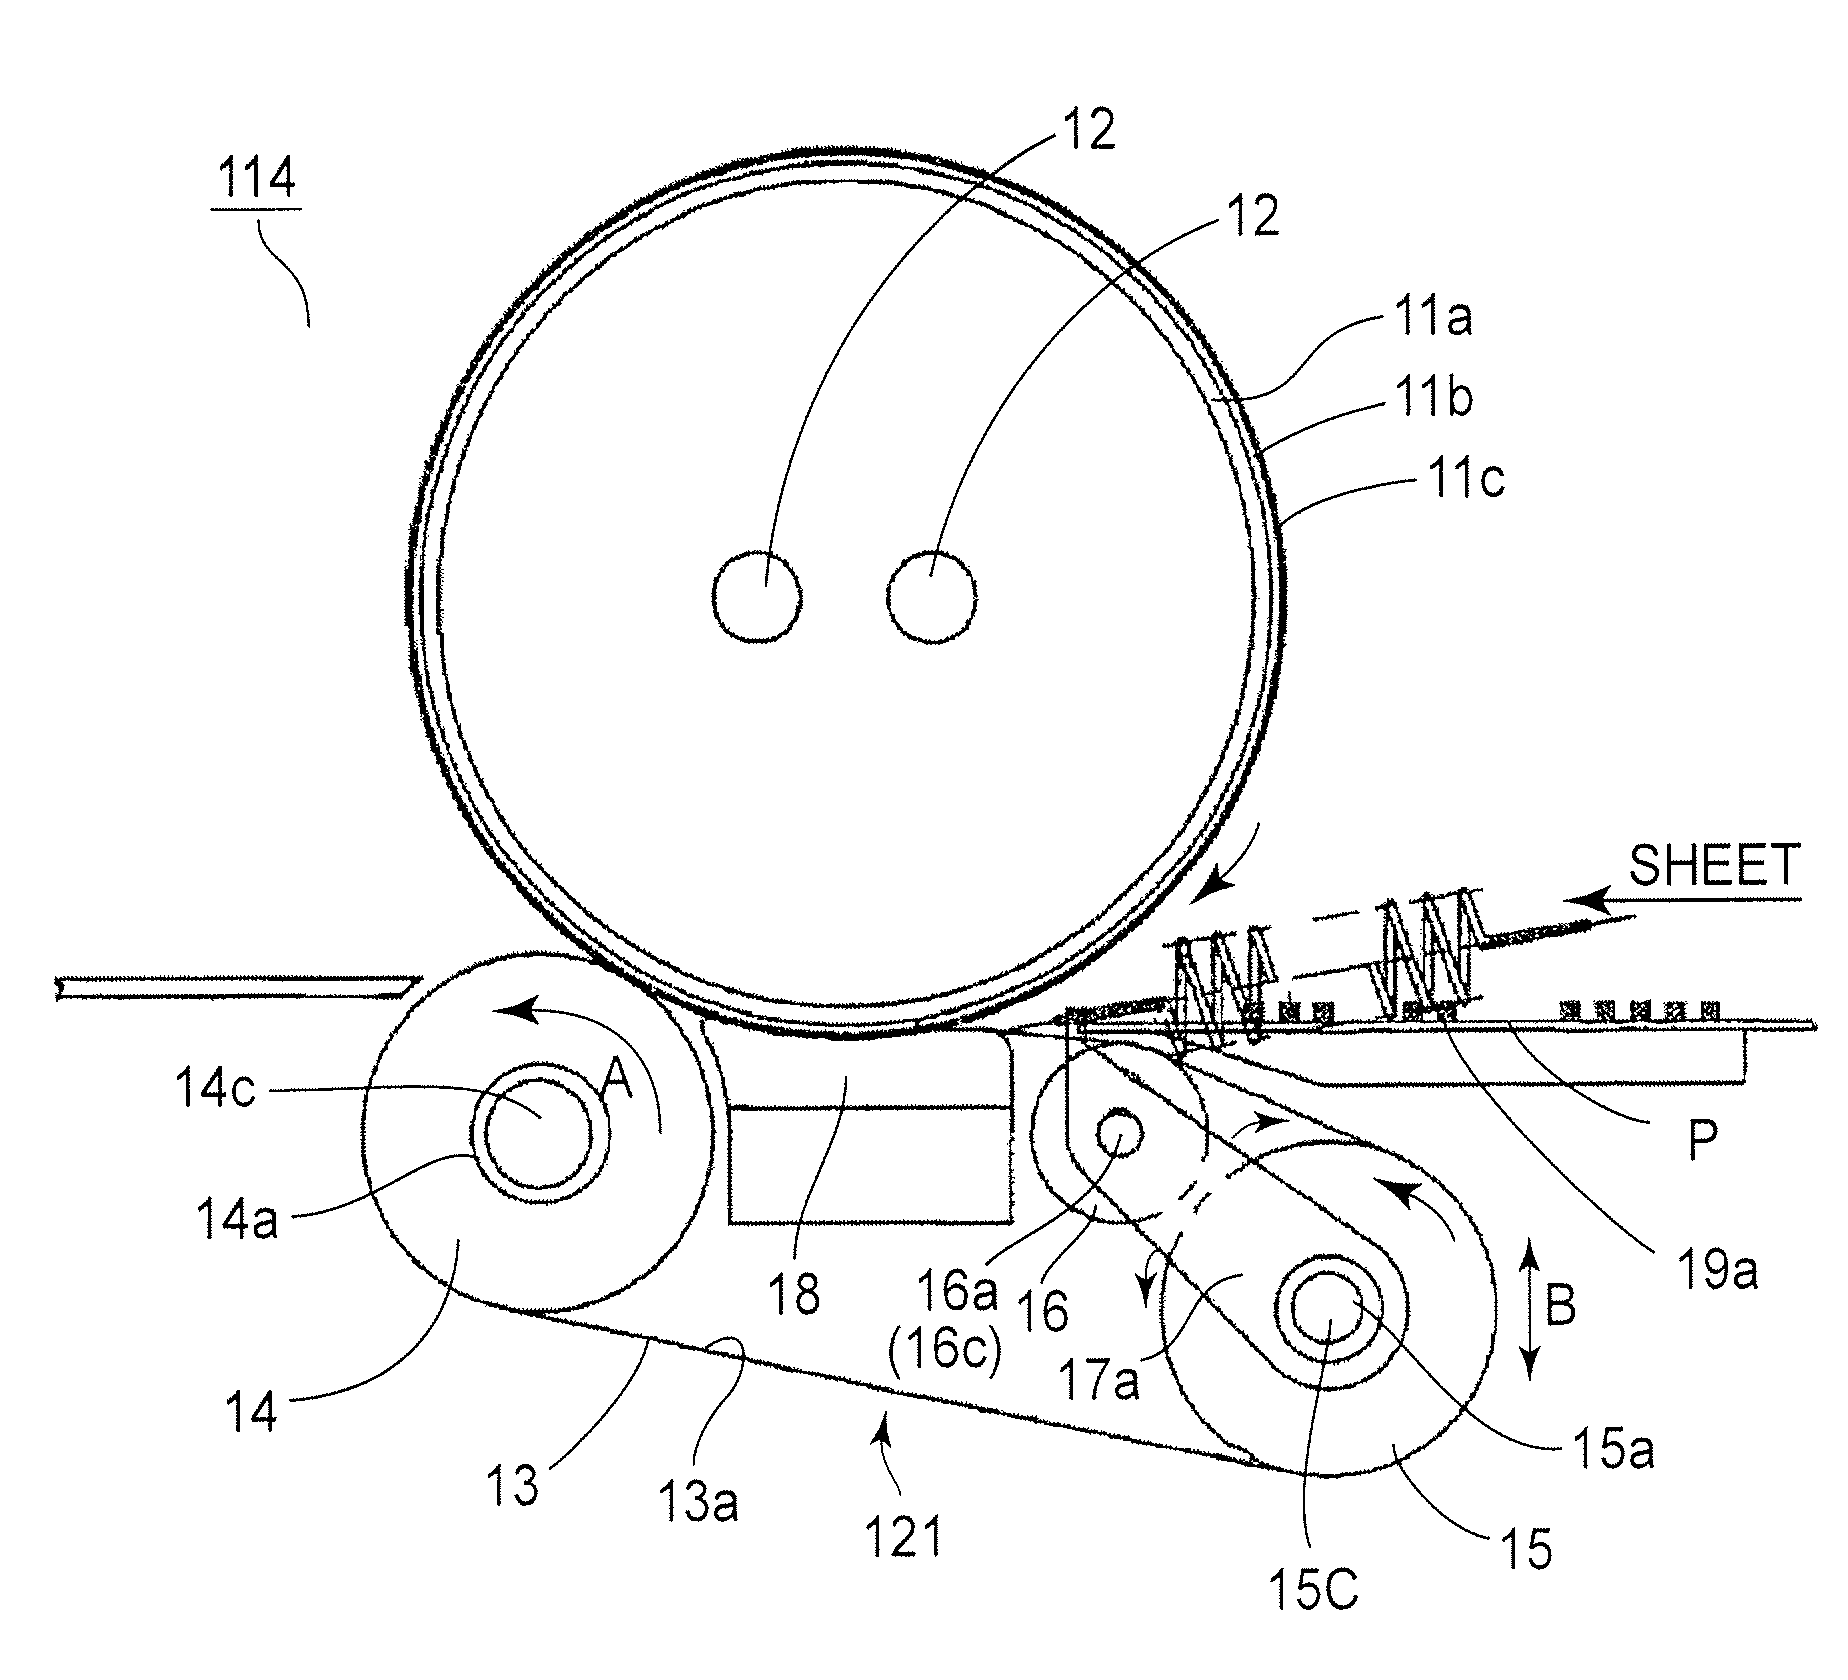 Image heating apparatus and image forming apparatus with displacing members for displacing other members of the apparatuses